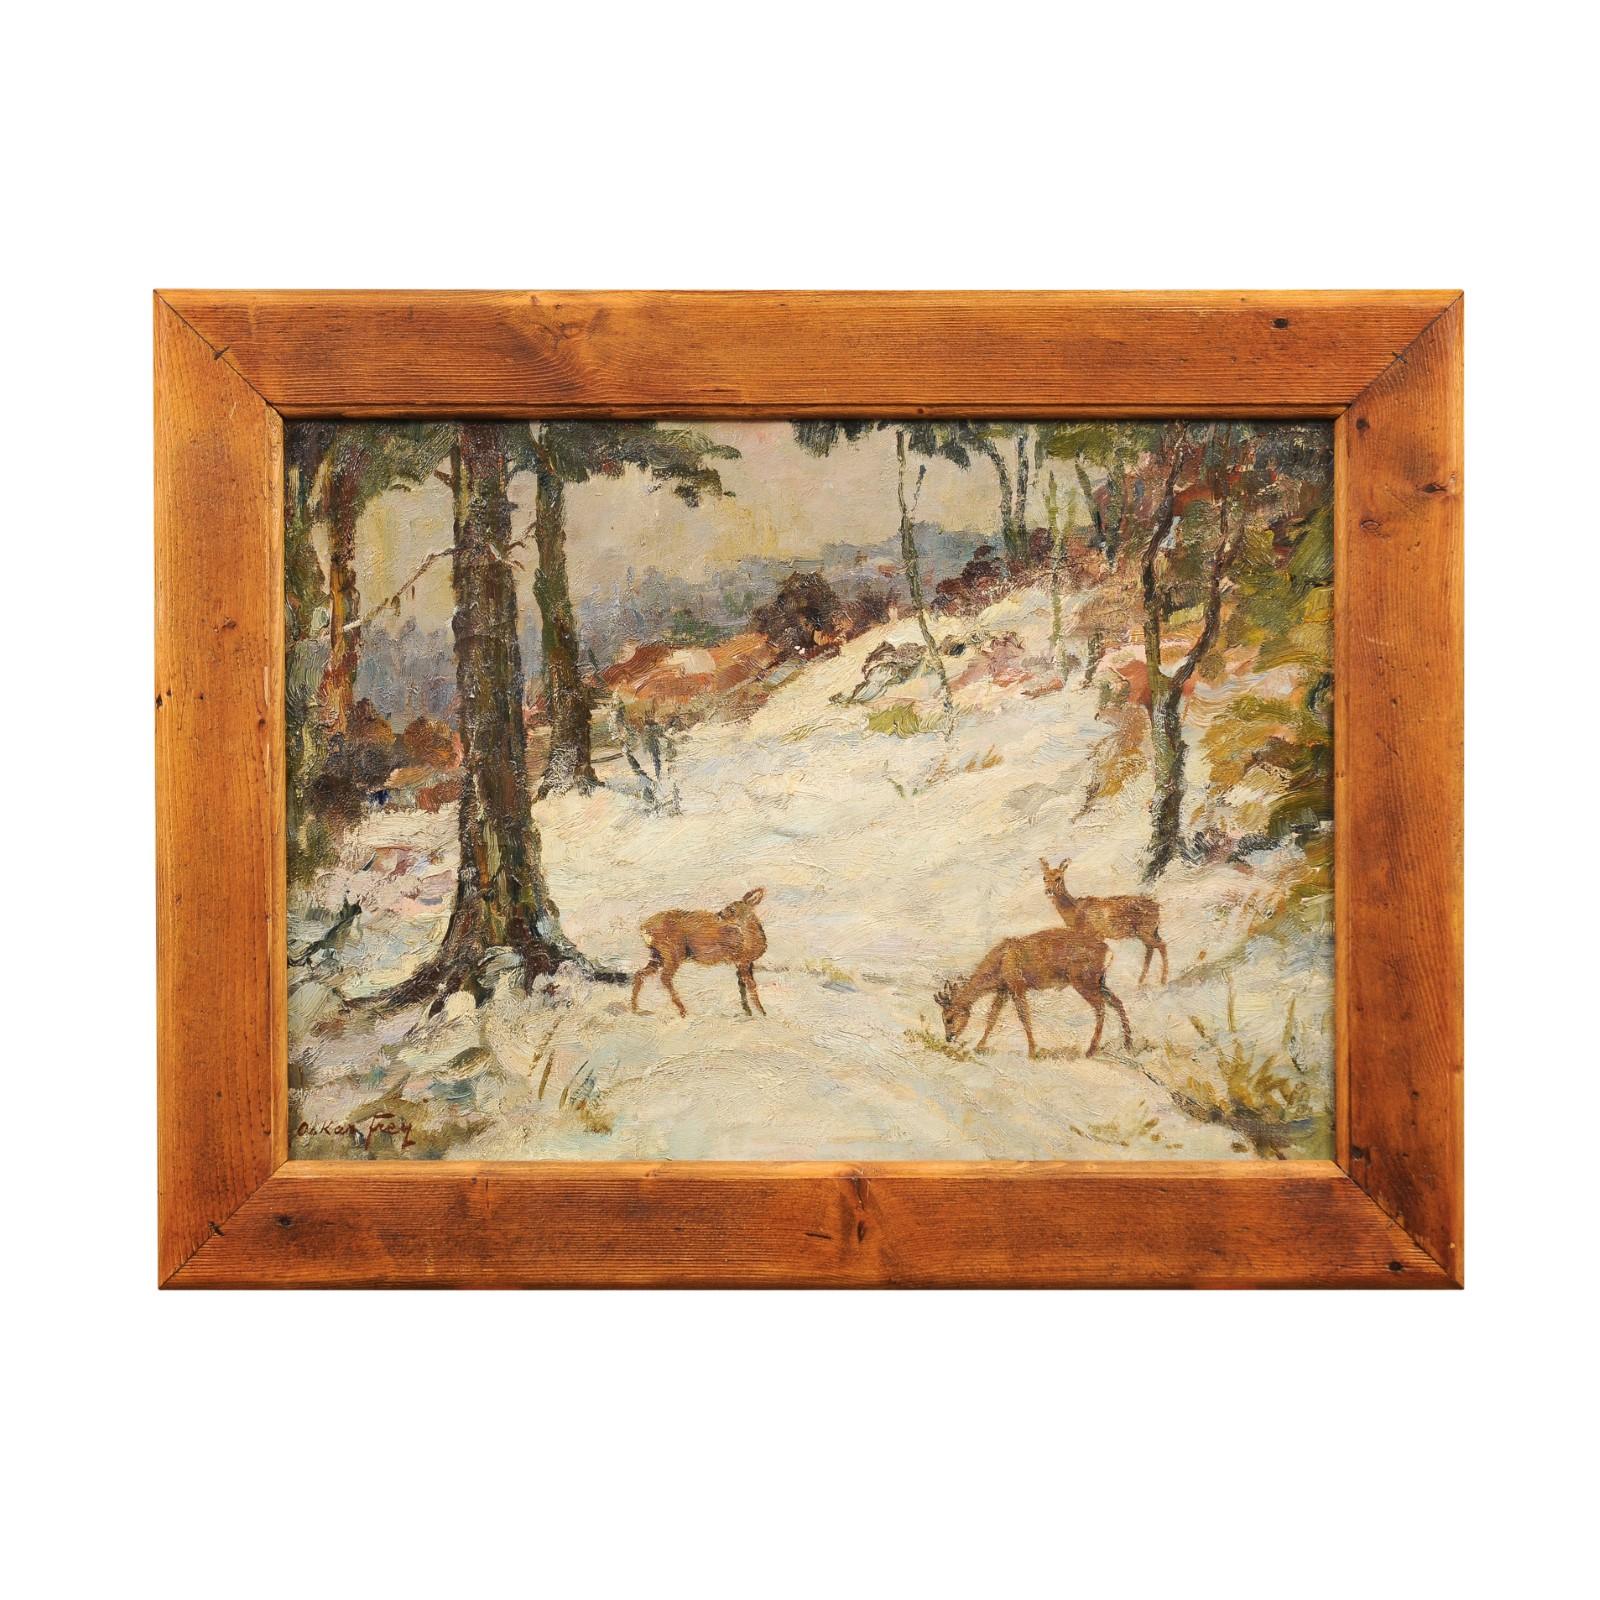 A German oil on canvas mounted on board painting from the early 20th century by artist Oskar Frey, titled 'Deer in the Snowy Forest'. Created in Germany during the second quarter of the 20th century, this oil on canvas painting mounted on a flat